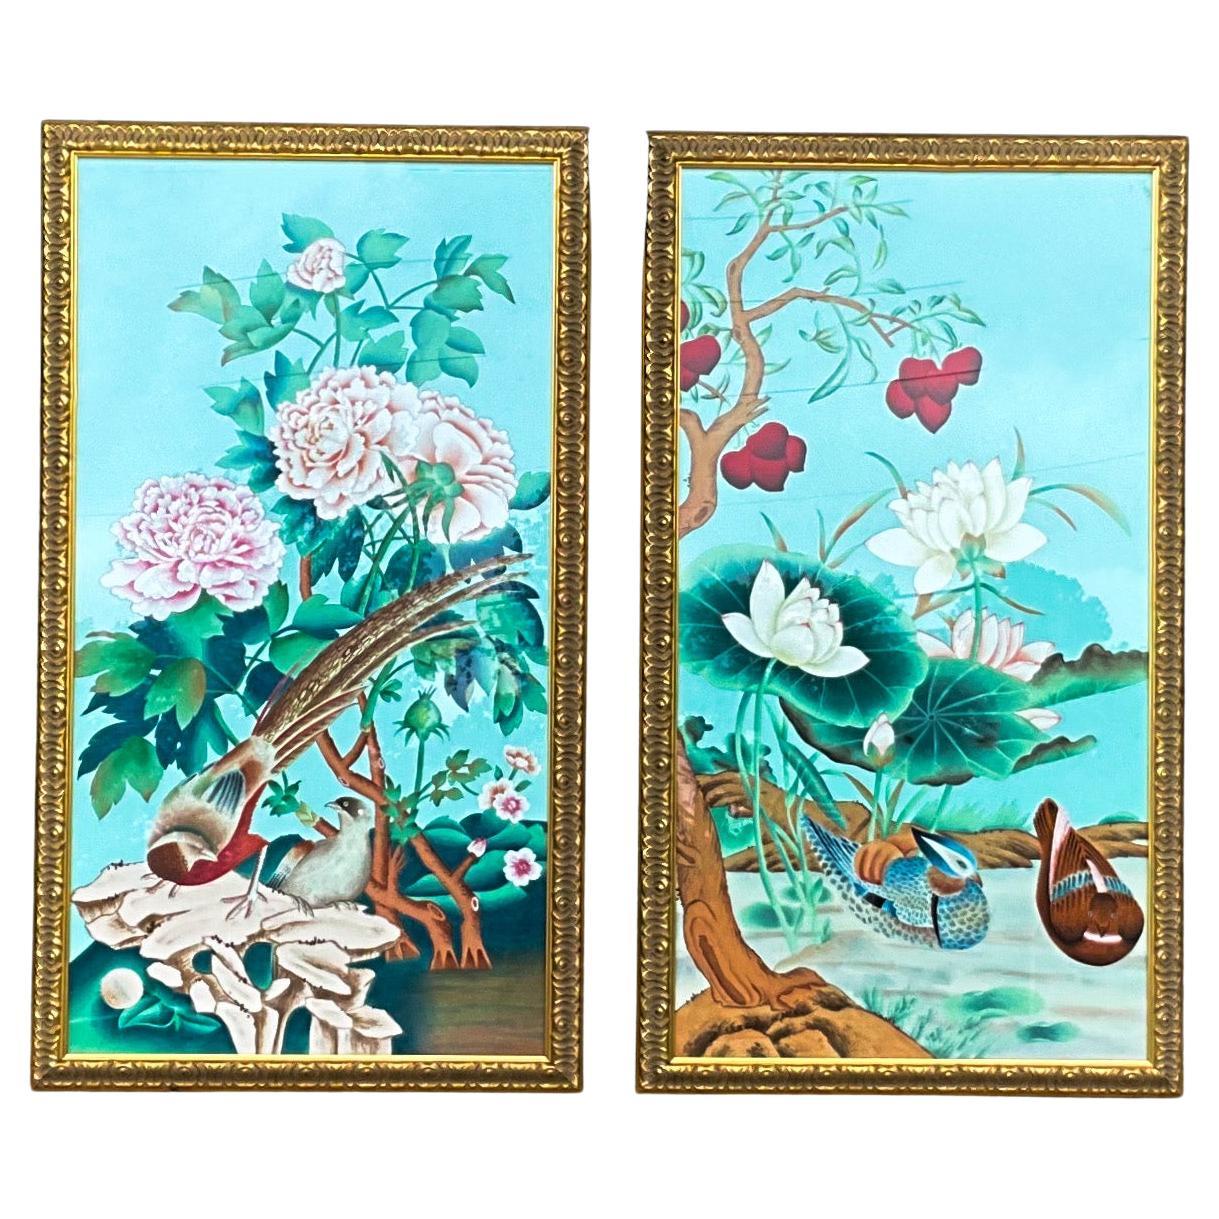 Large Asian Oil on Silk Paintings by Chelsea House, Floral, Bird, Botanical S/2 For Sale